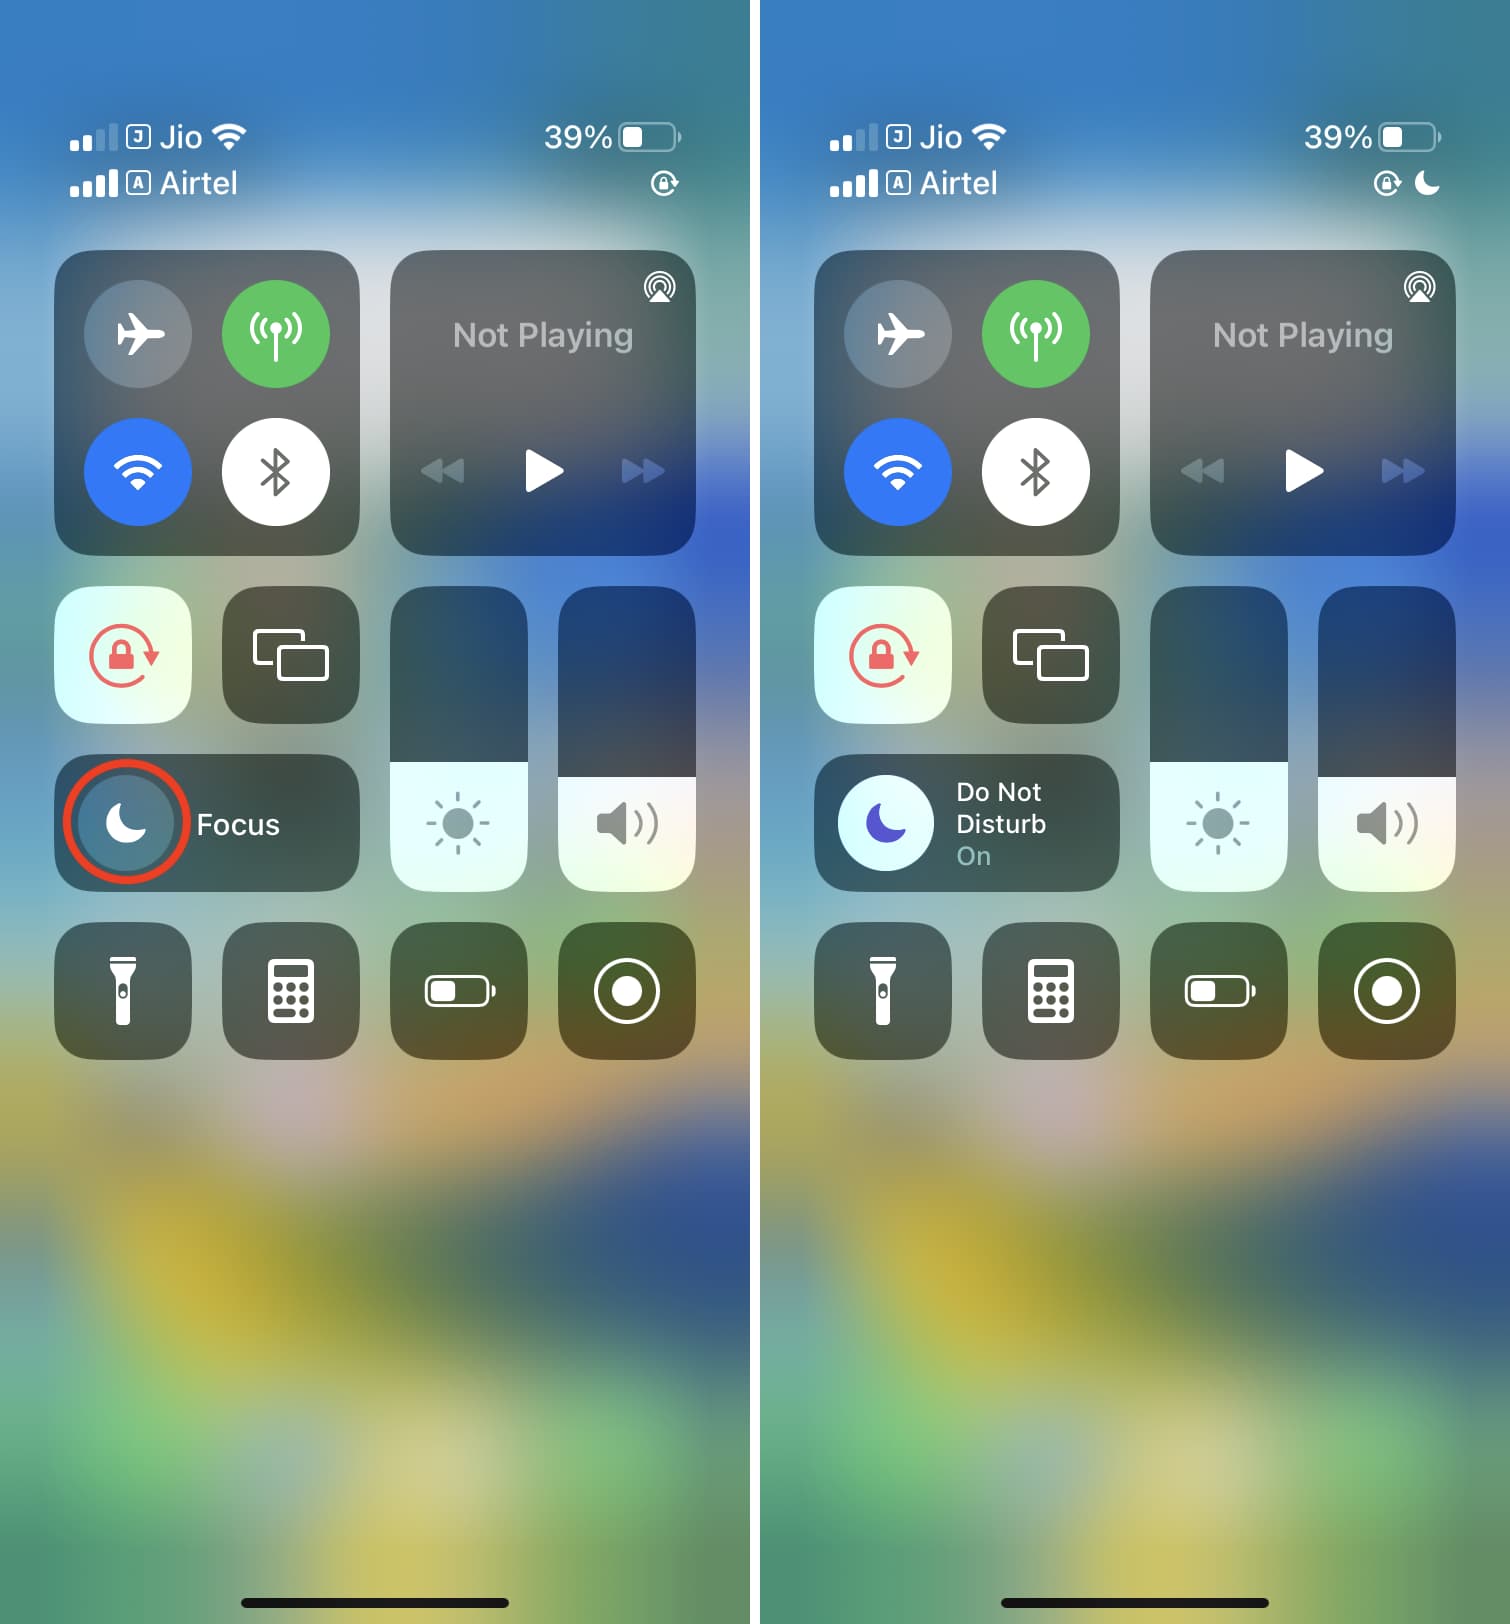 Enable DND on iPhone from the Control Center